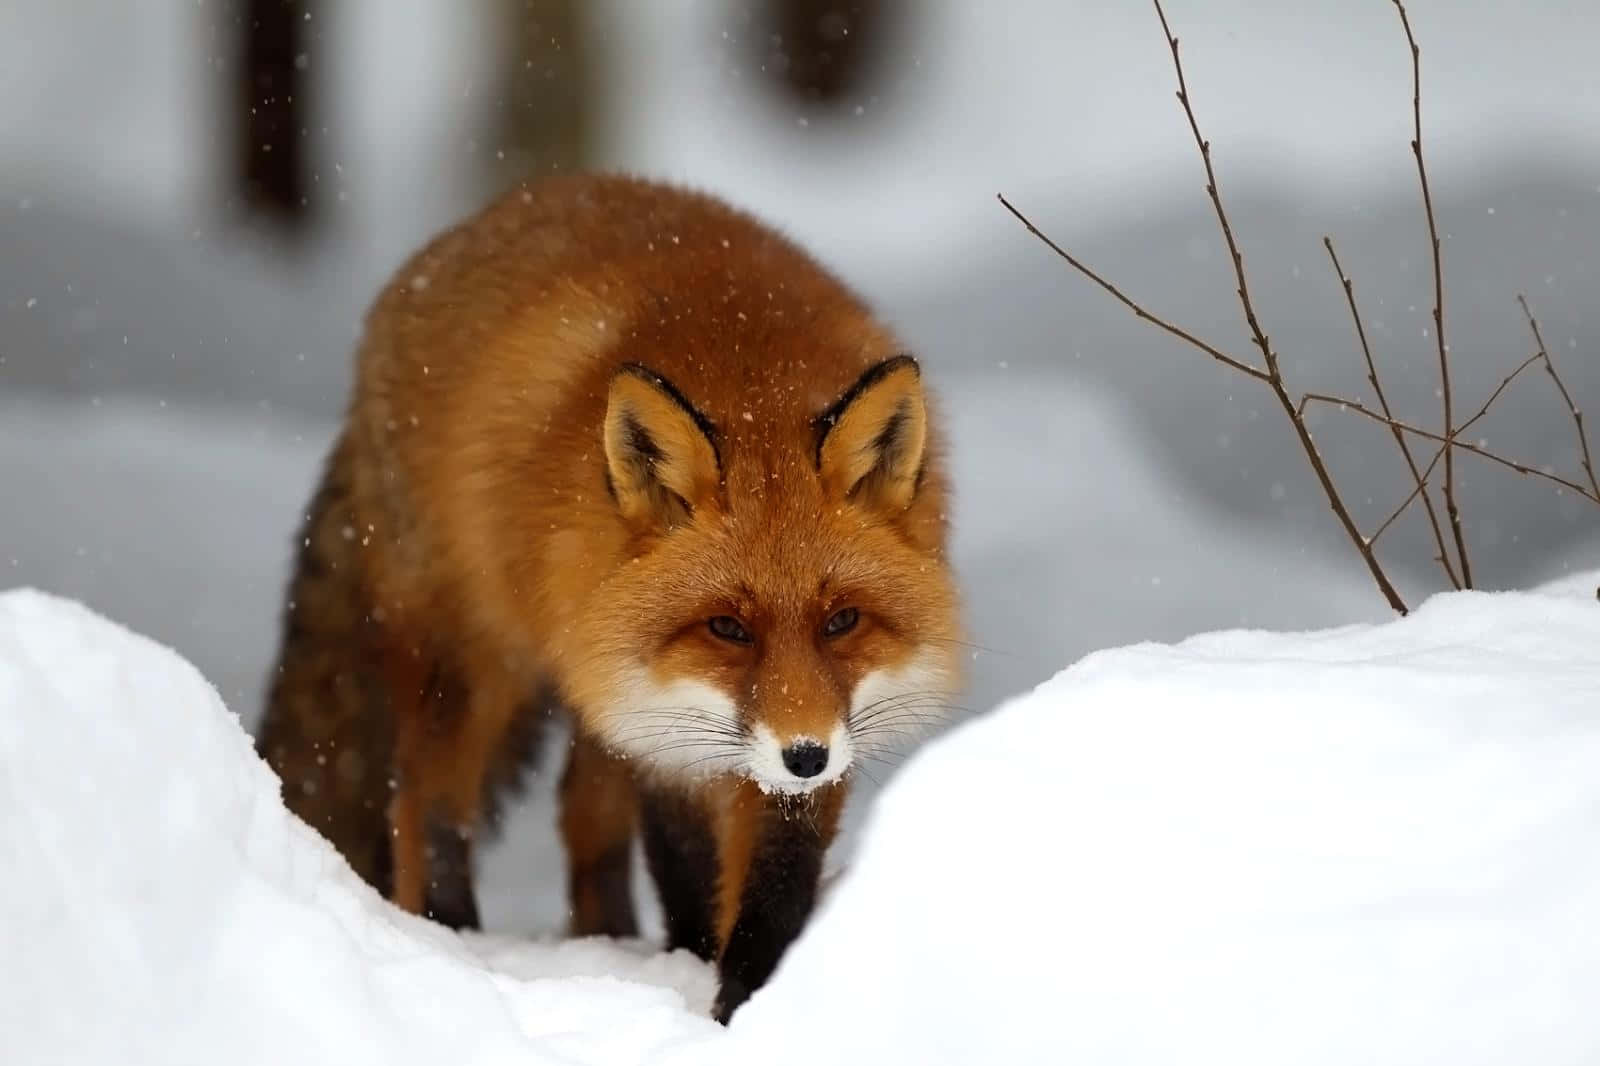 Cool Fox In The Snow Hunting Posture Wallpaper